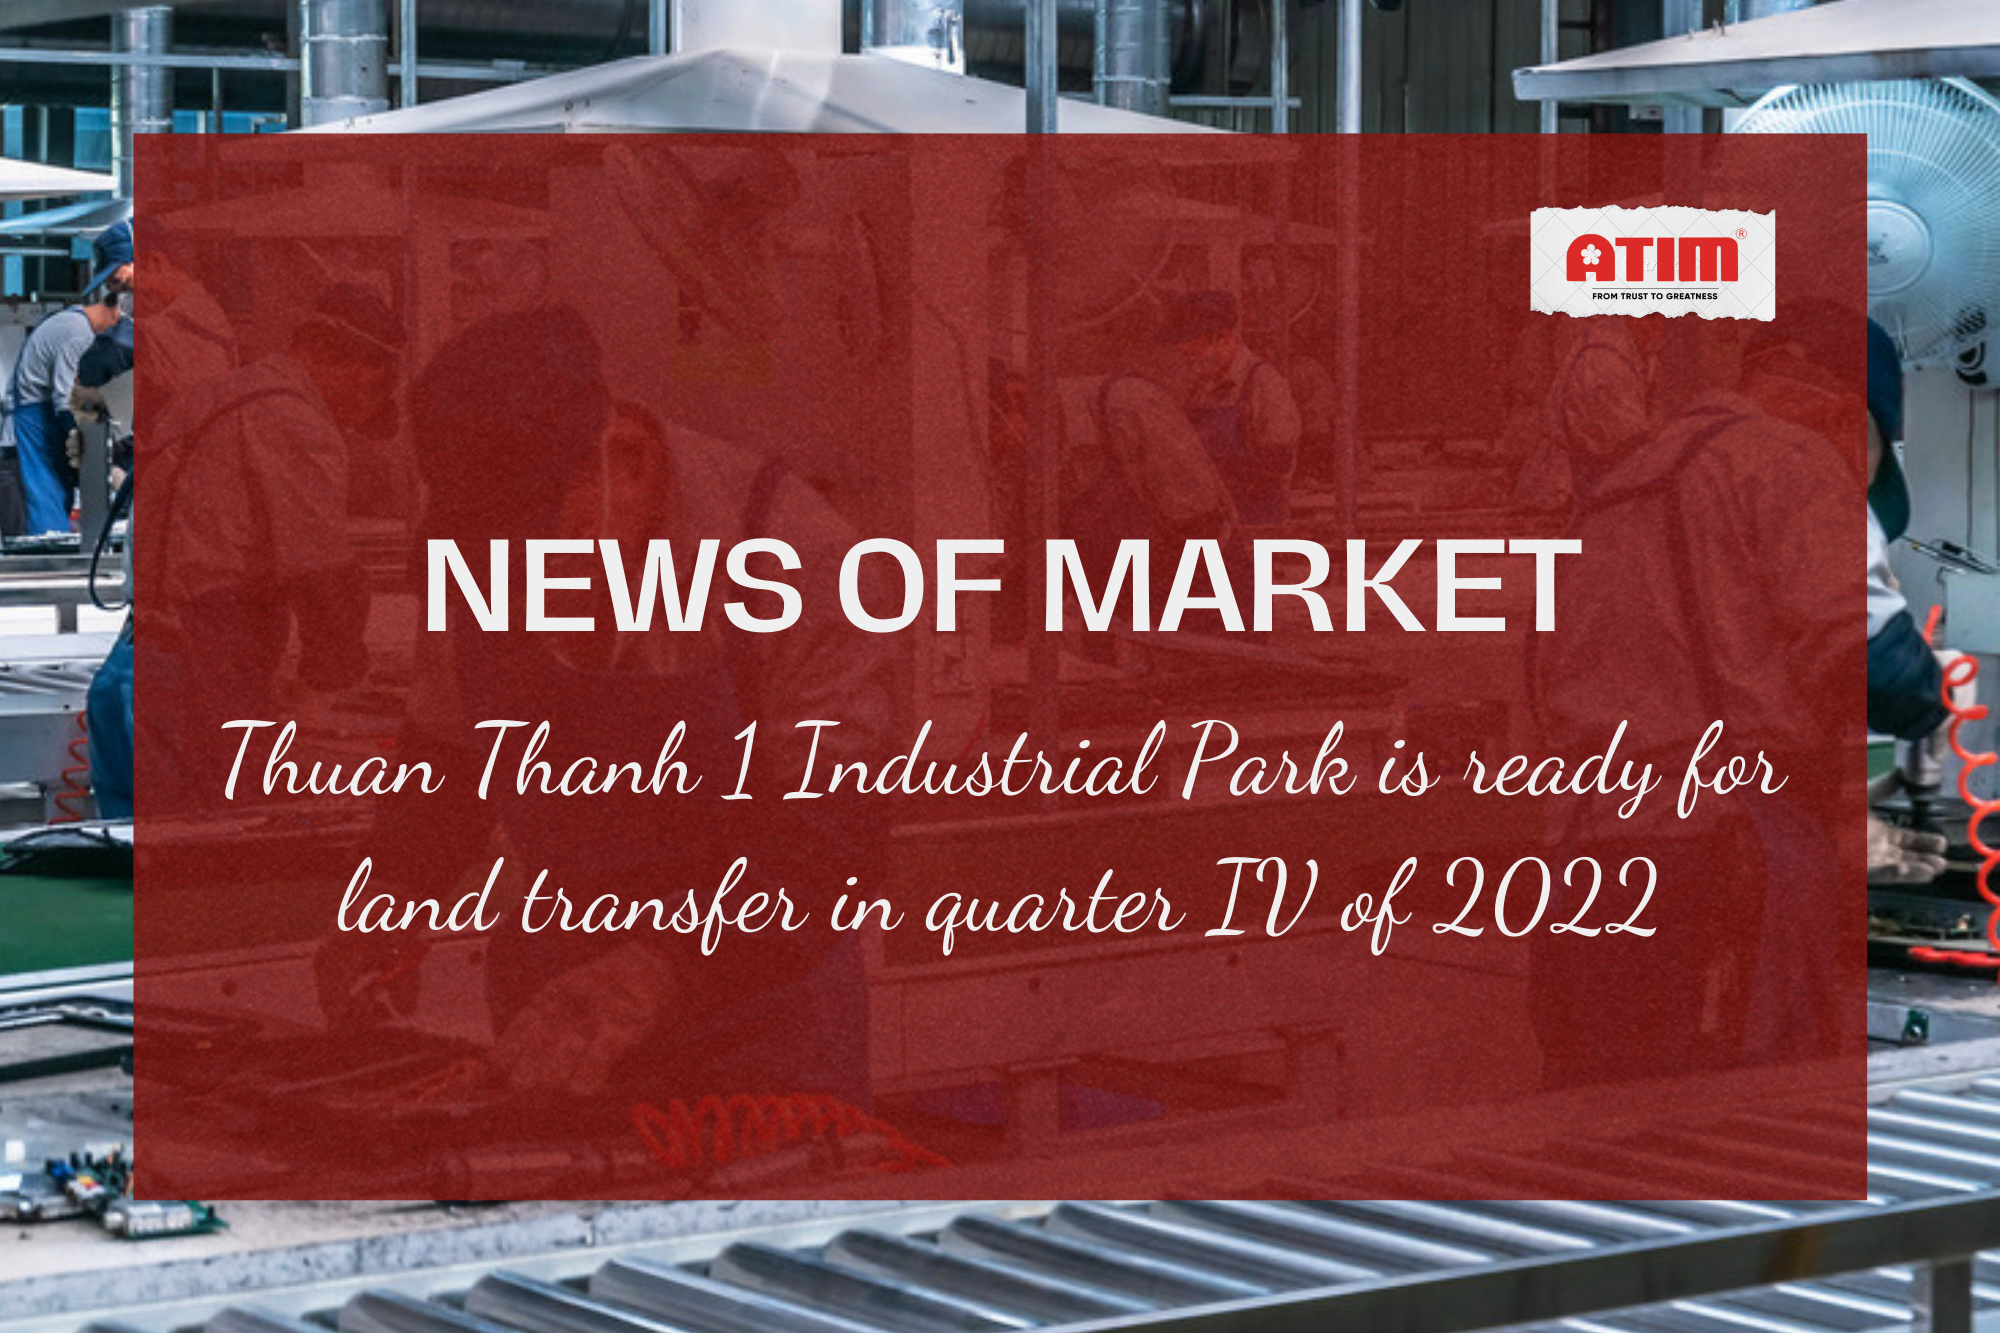 Thuan Thanh 1 Industrial Park is ready for land transfer in quarter IV of 2022